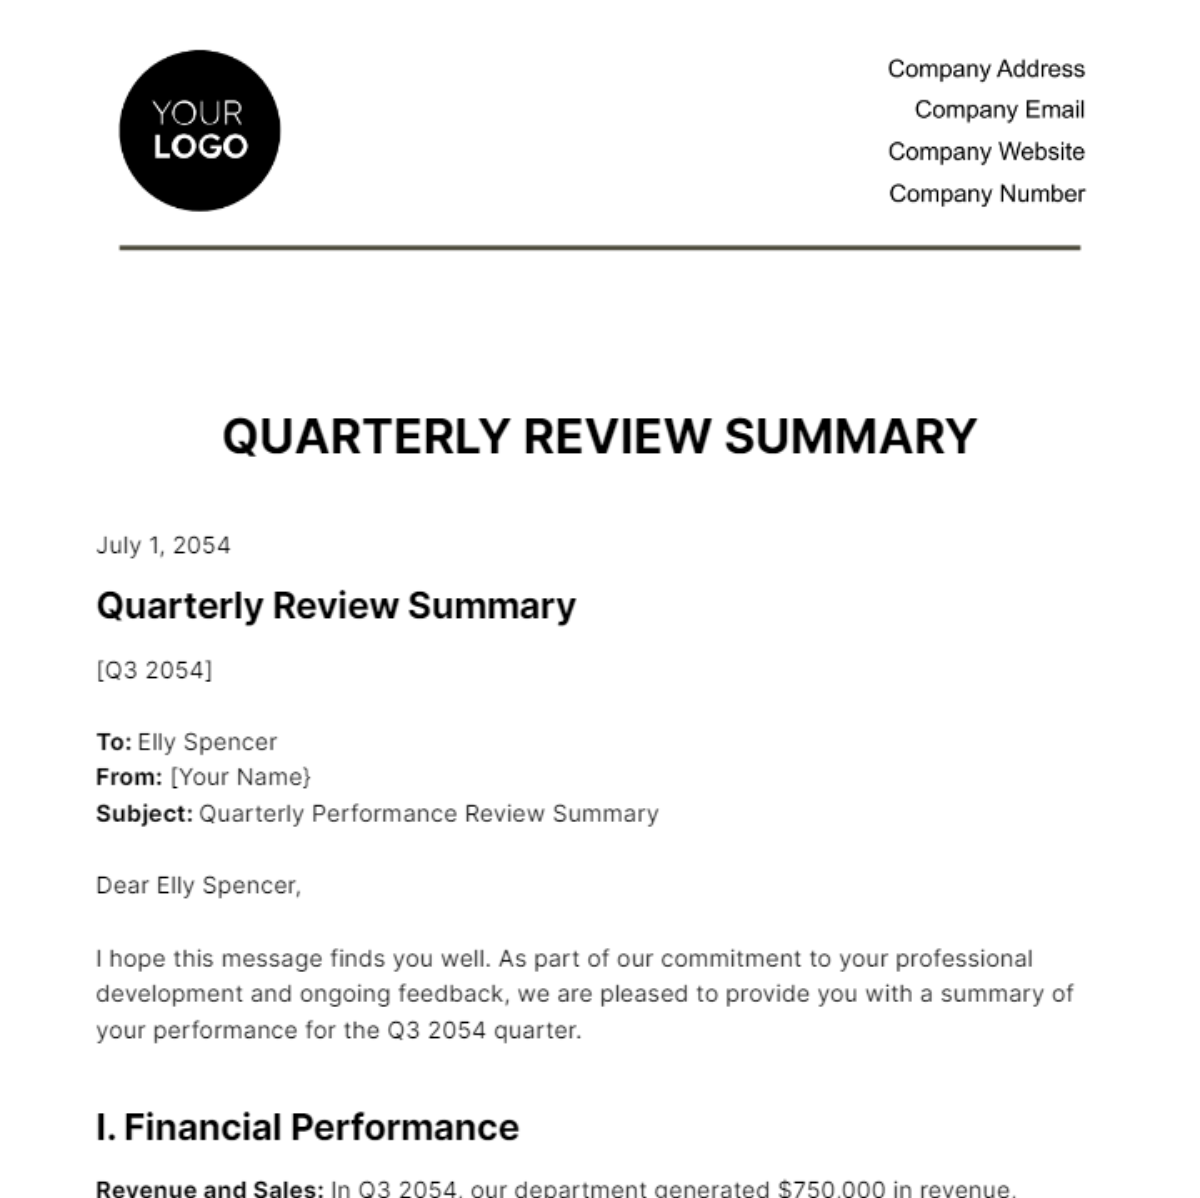 Free Quarterly Review Summary HR Template